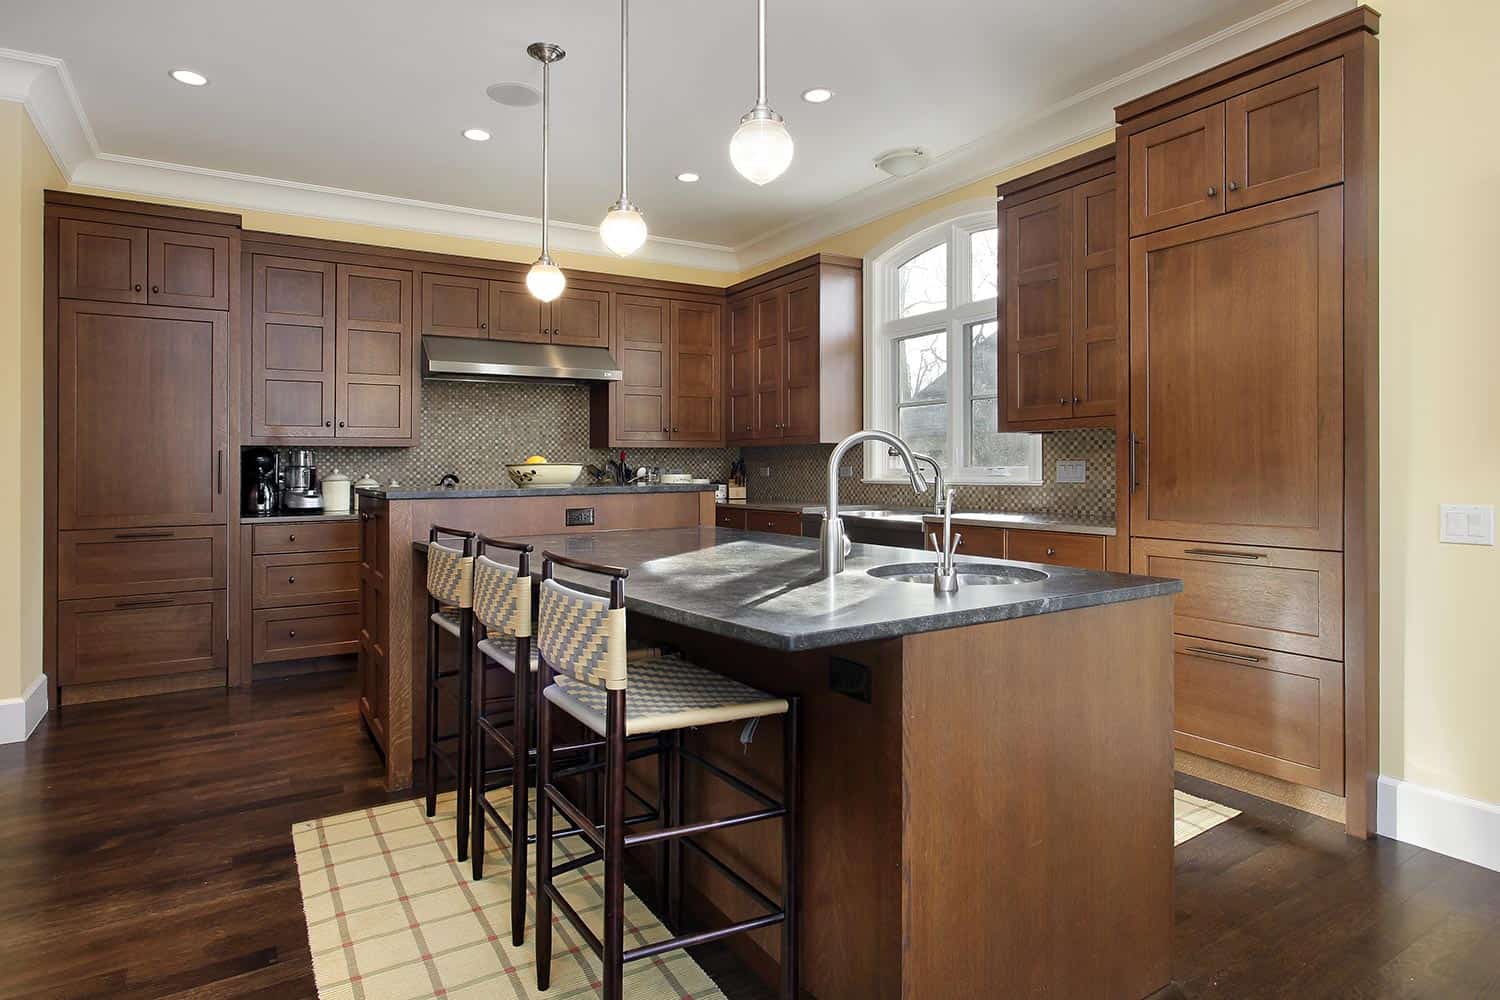 Kitchen in luxury home with oak wood cabinetry